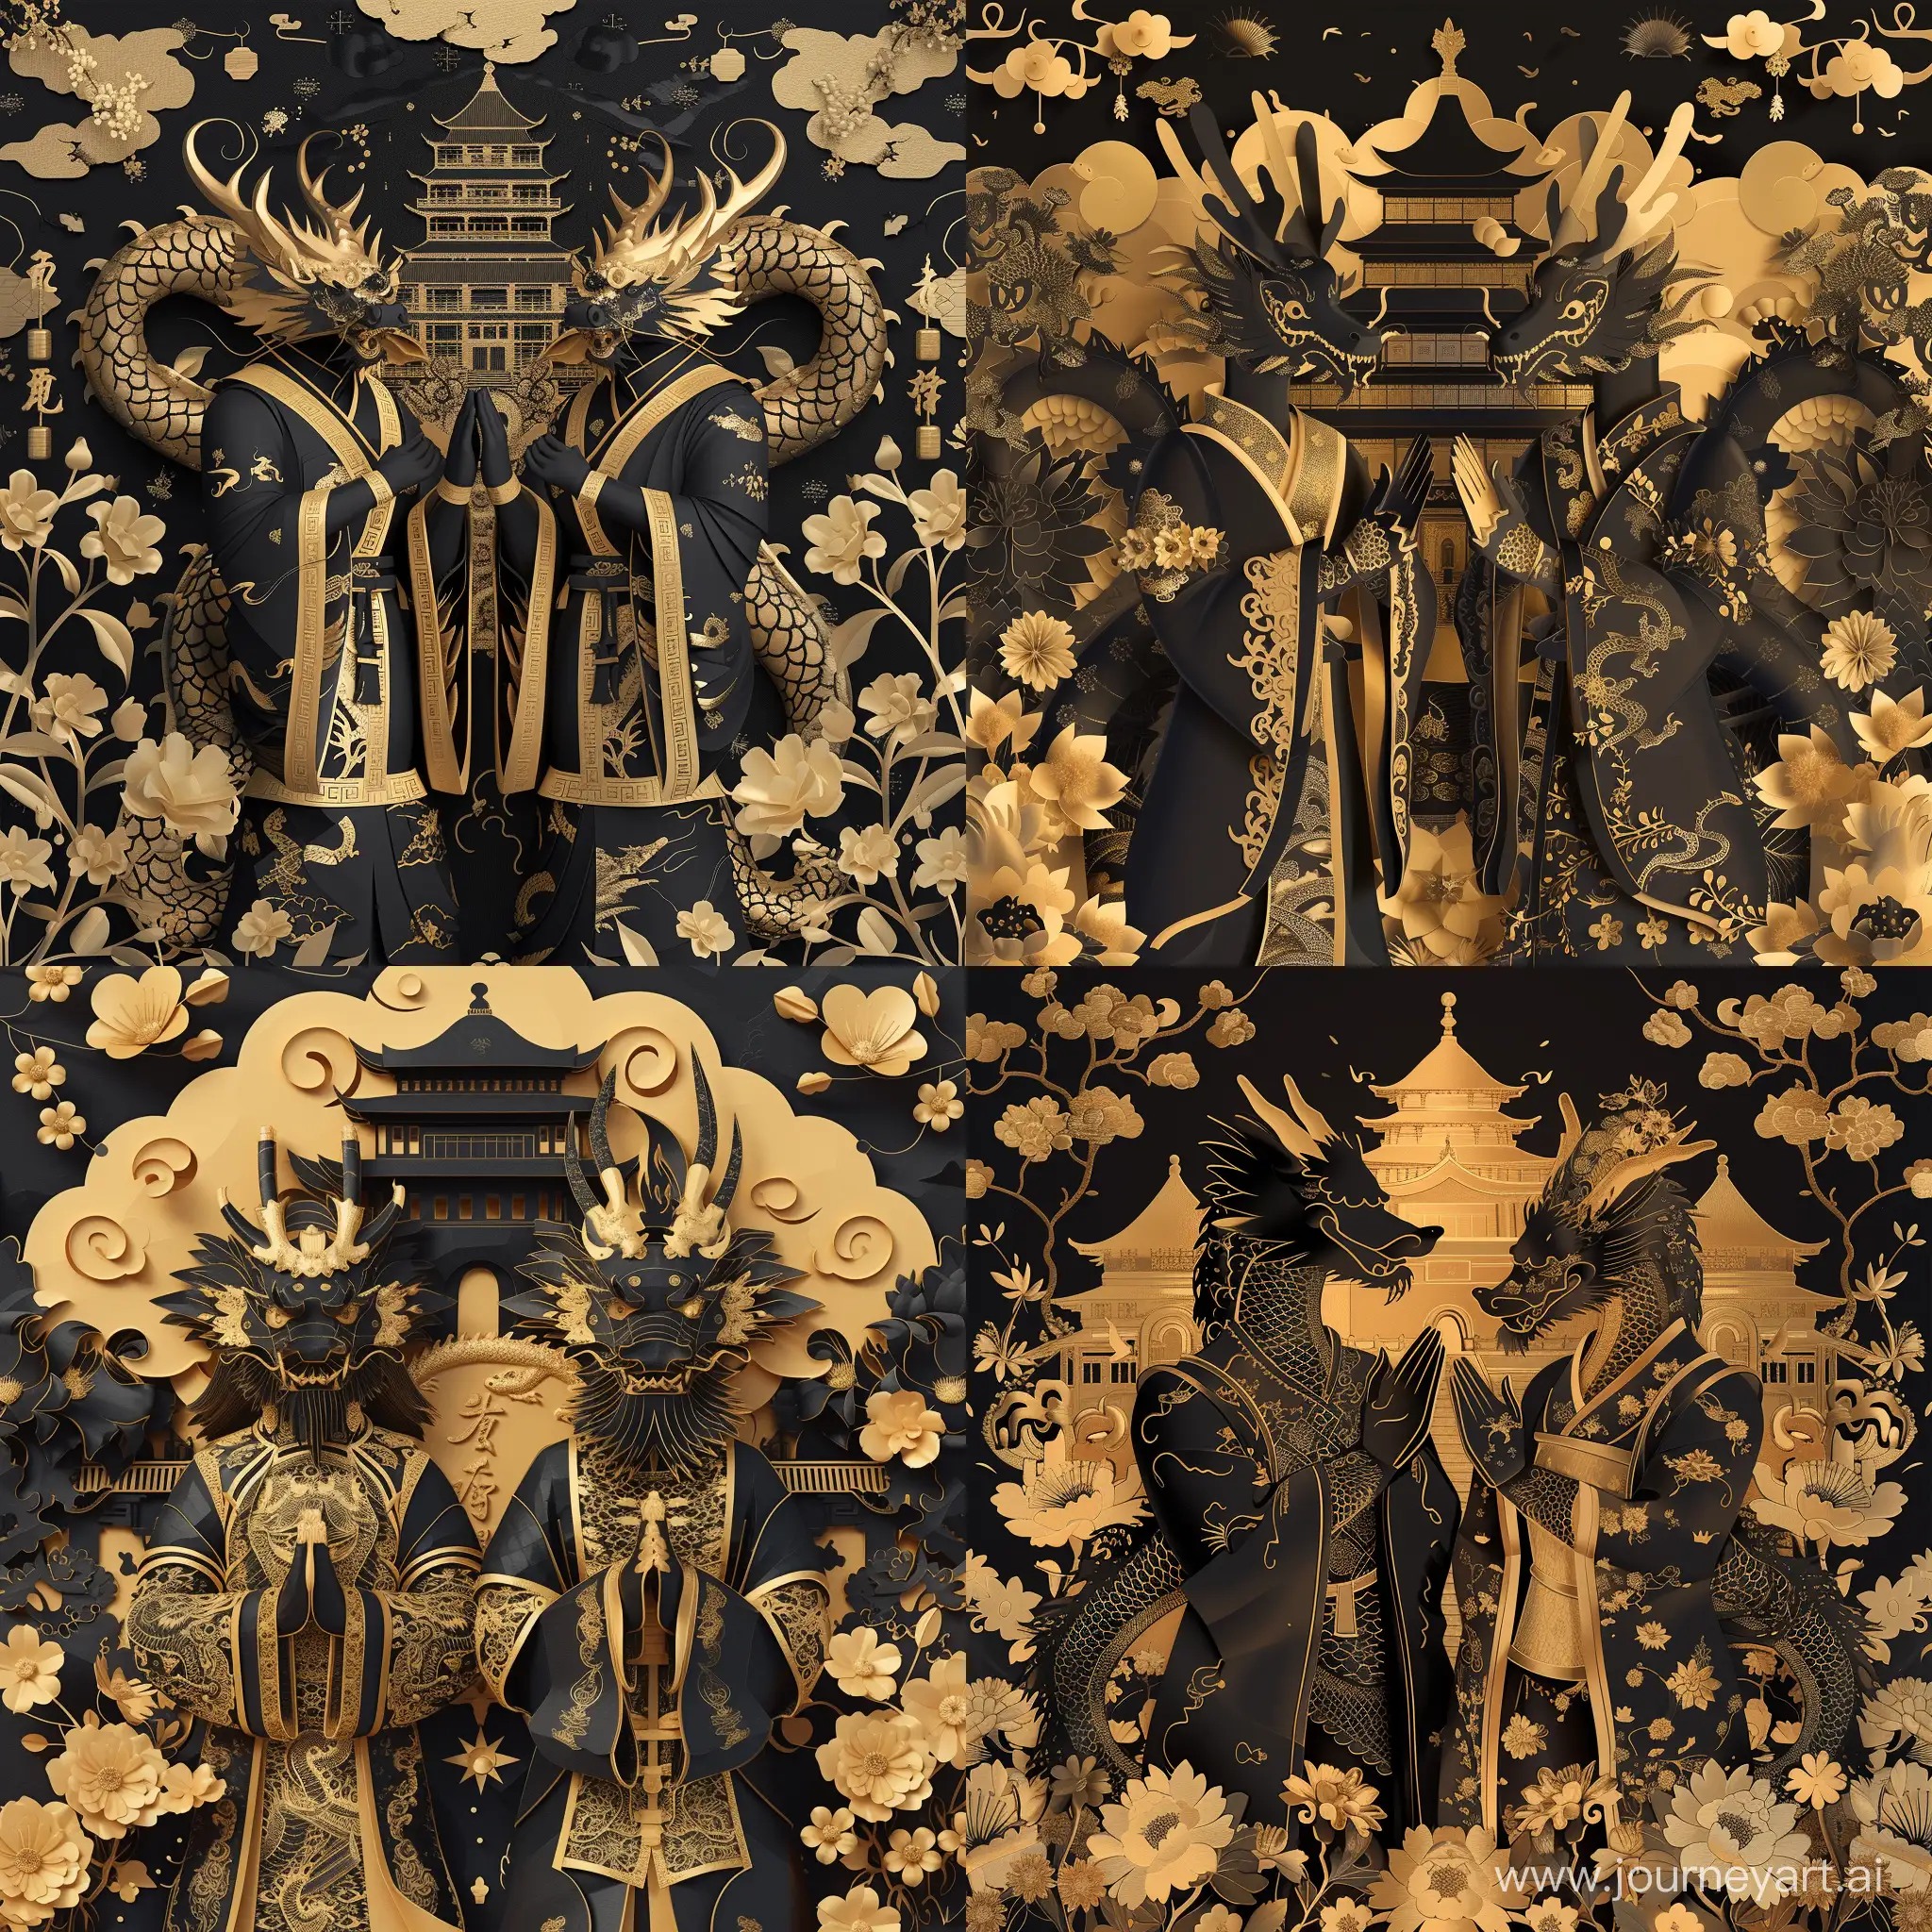 Regal-Black-and-Gold-Dragons-in-Chinese-Court-Attire-Bowing-at-Magnificent-Palace